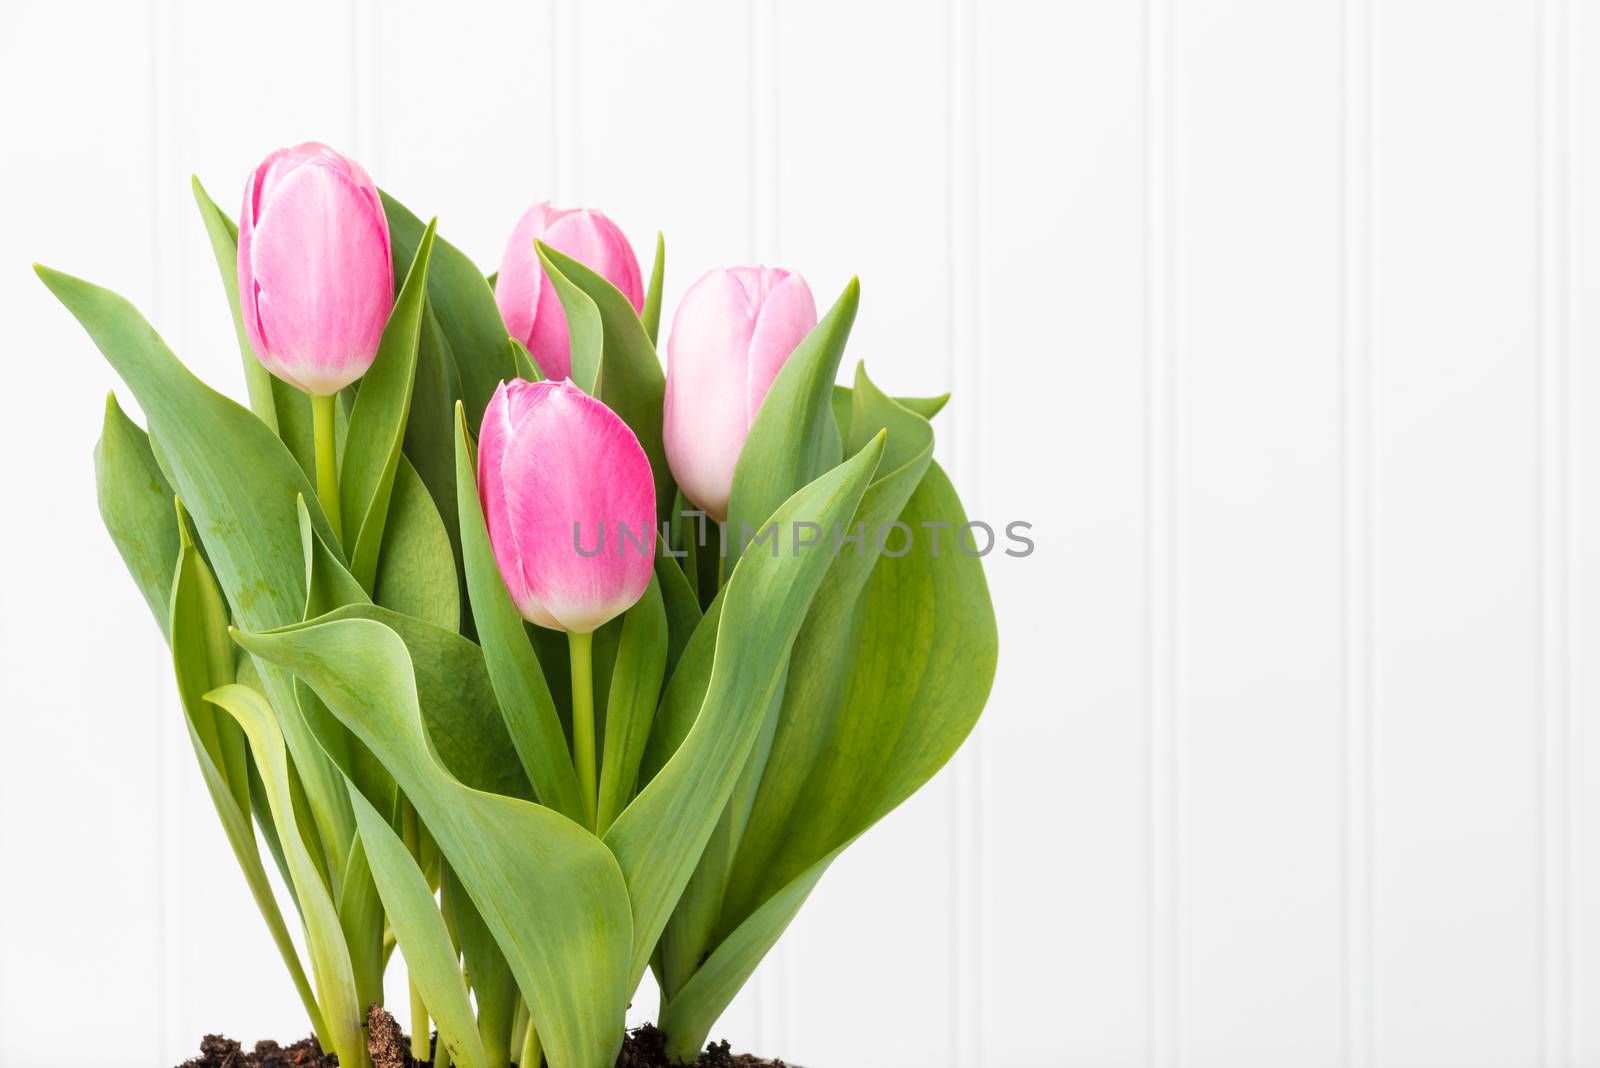 Spring Tulips by billberryphotography